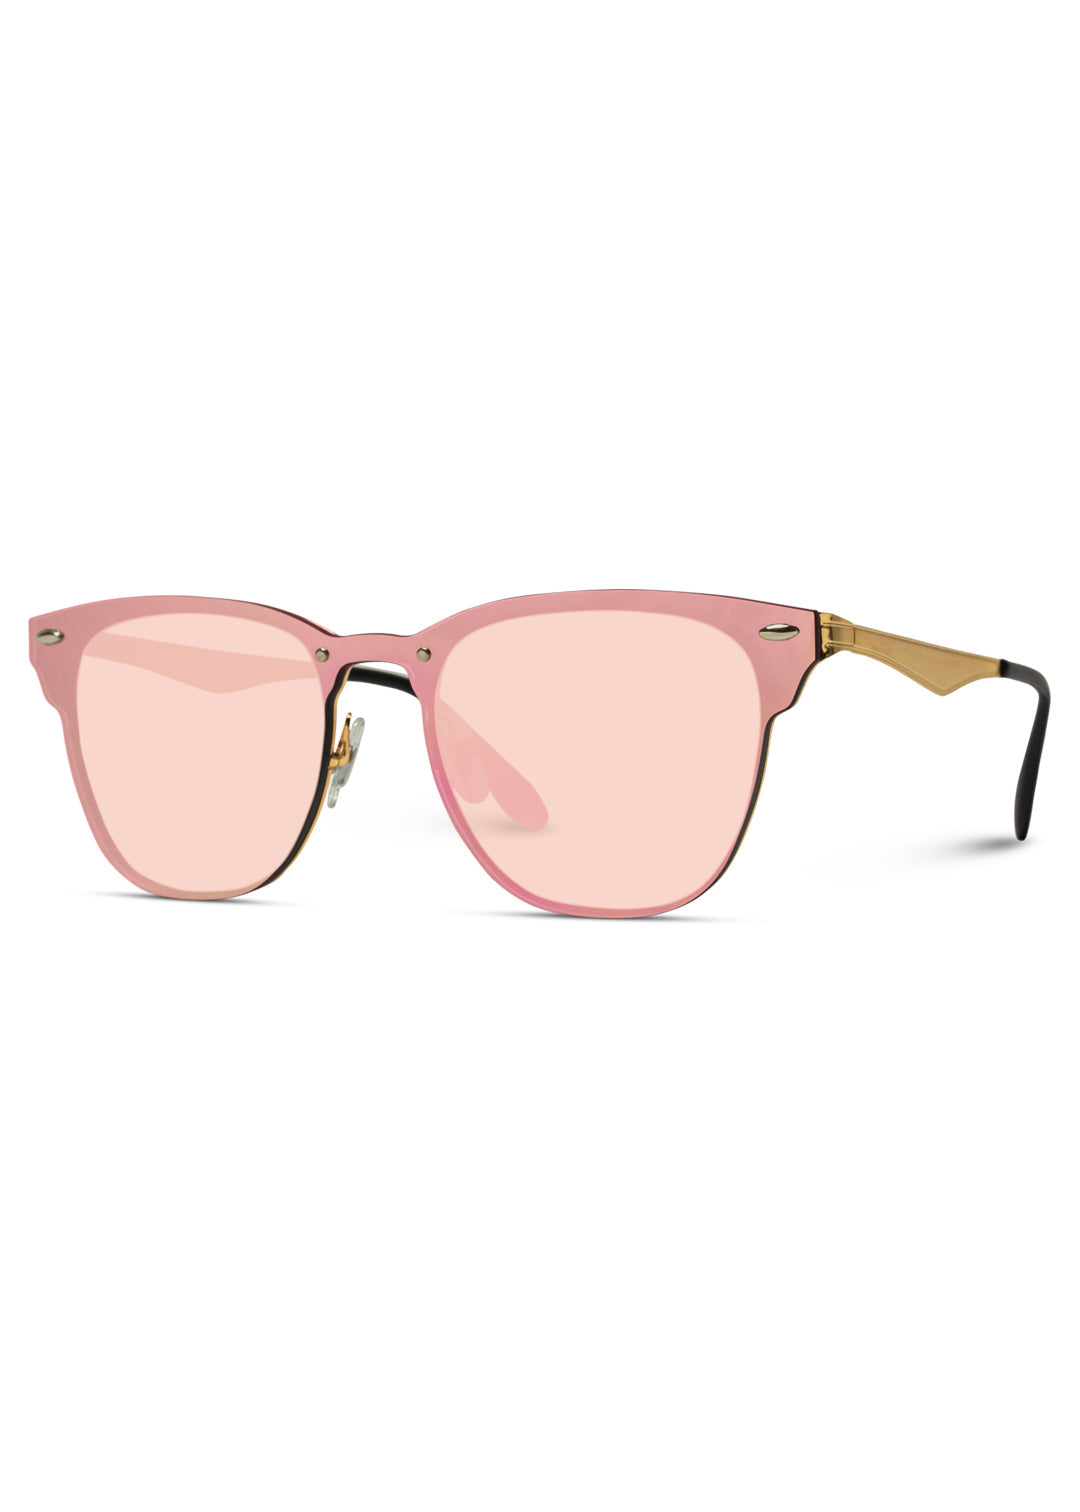 Gold Frame Pink Lens Sunglasses Accessories